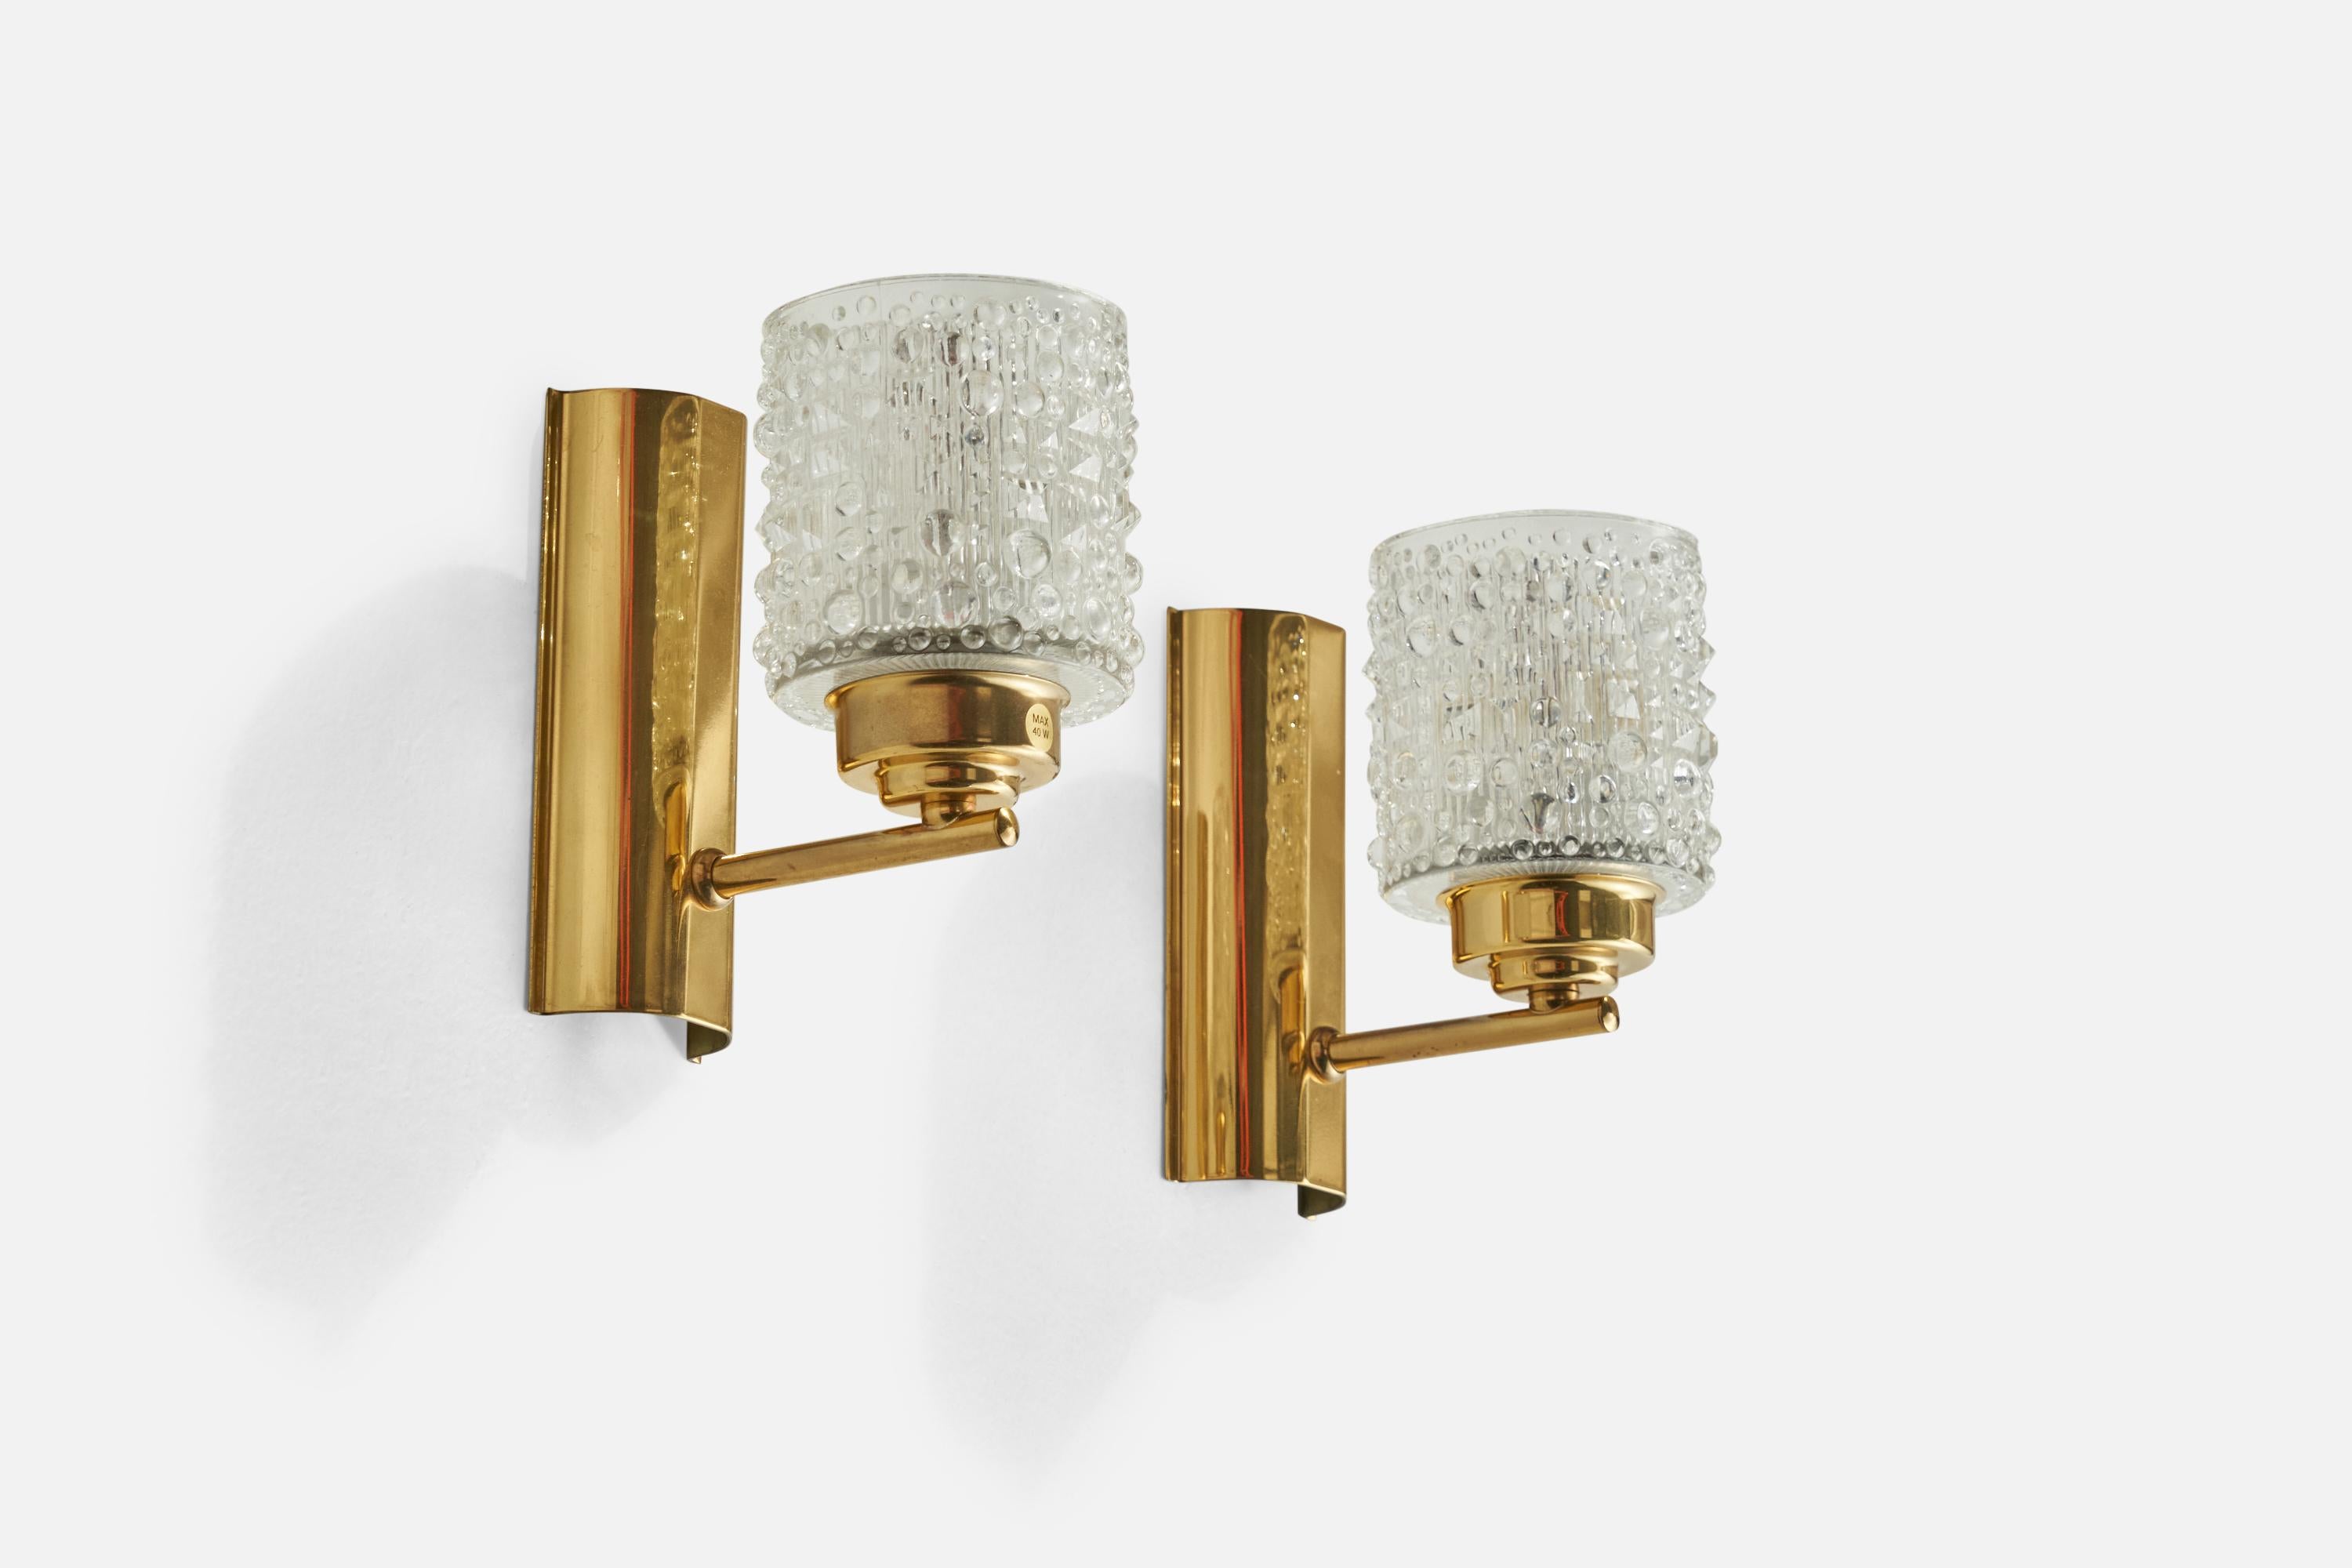 A pair of brass and glass wall lights designed and produced in Sweden, c. 1960s.

Overall Dimensions (inches): 6.25” H x 3.5” W x 5.6” D
Back Plate Dimensions (inches): 5.9” H x 2.62” W x 1.1” D
Bulb Specifications: E-14 Bulbs
Number of Sockets: